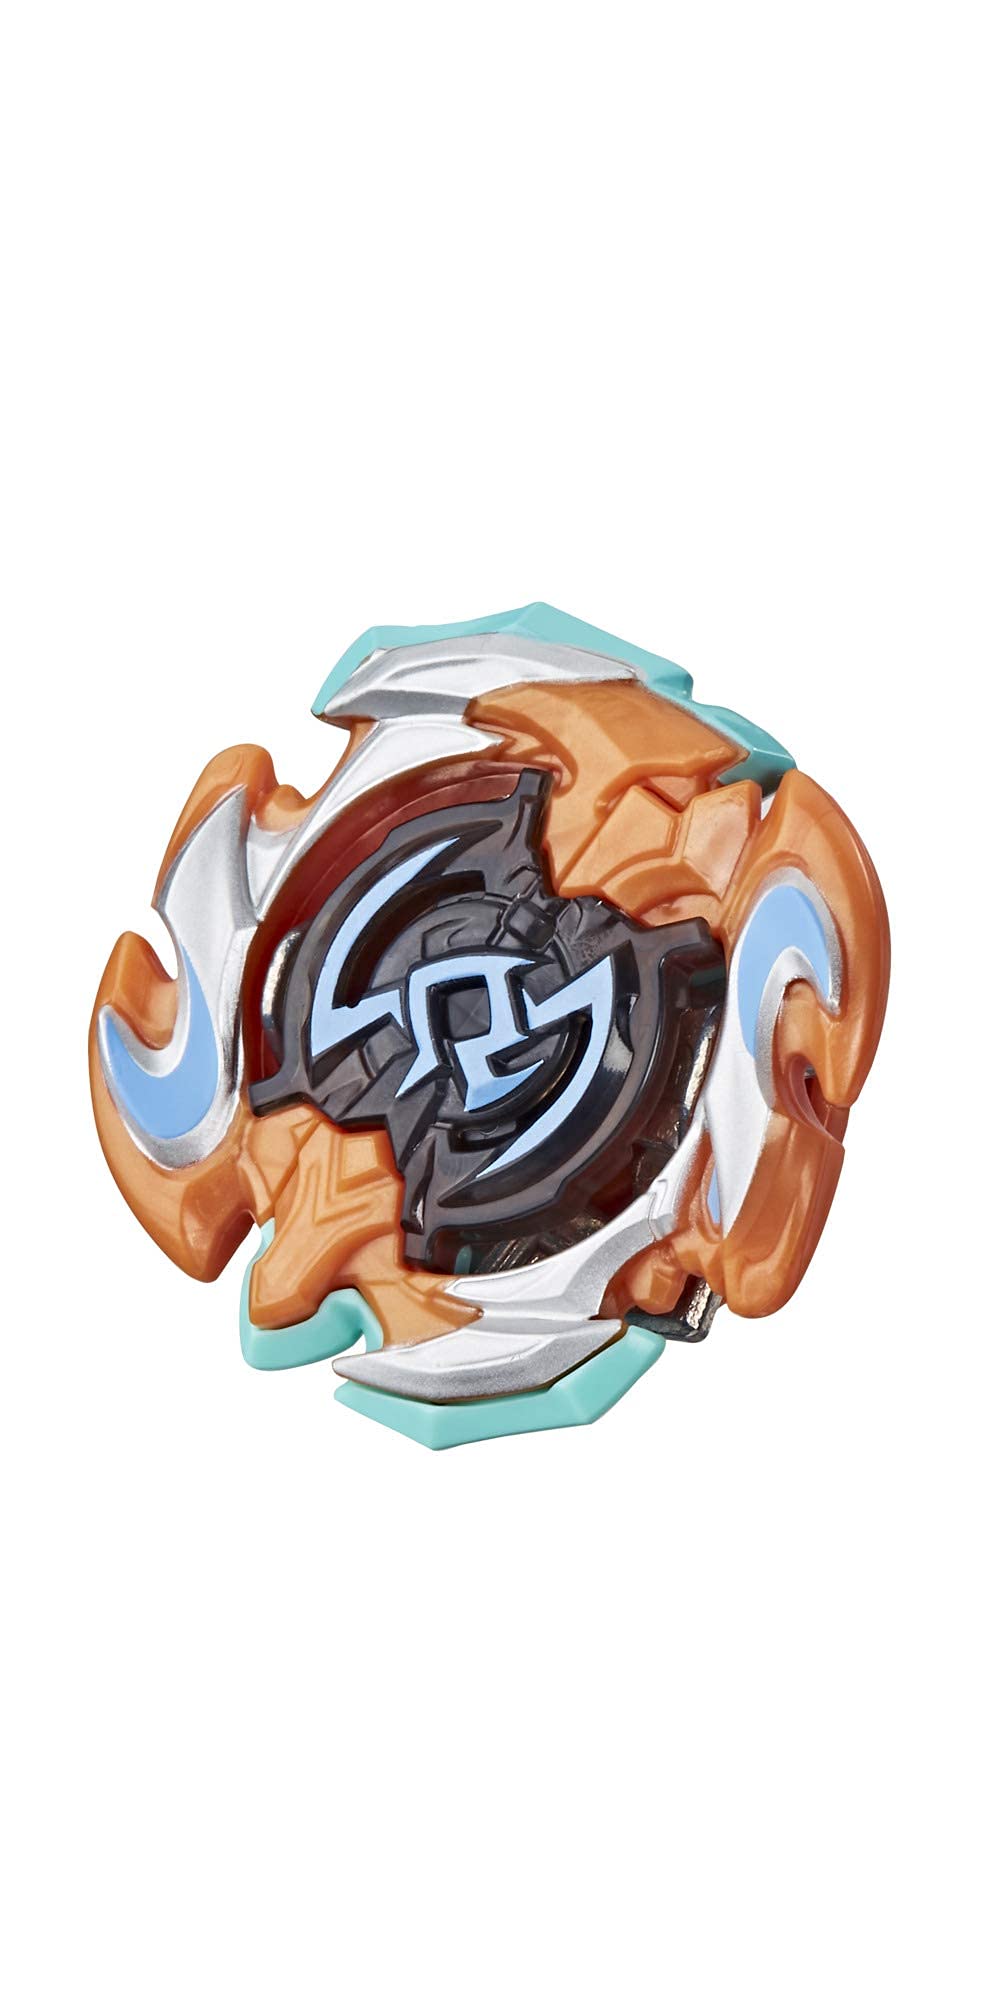 BEYBLADE Burst Rise Hypersphere Dual Pack Dusk Balkesh B5 and Right Artemis A5 -- 1 Left-Spin and 1 Right-Spin Battling Top Toy, 8 and Up